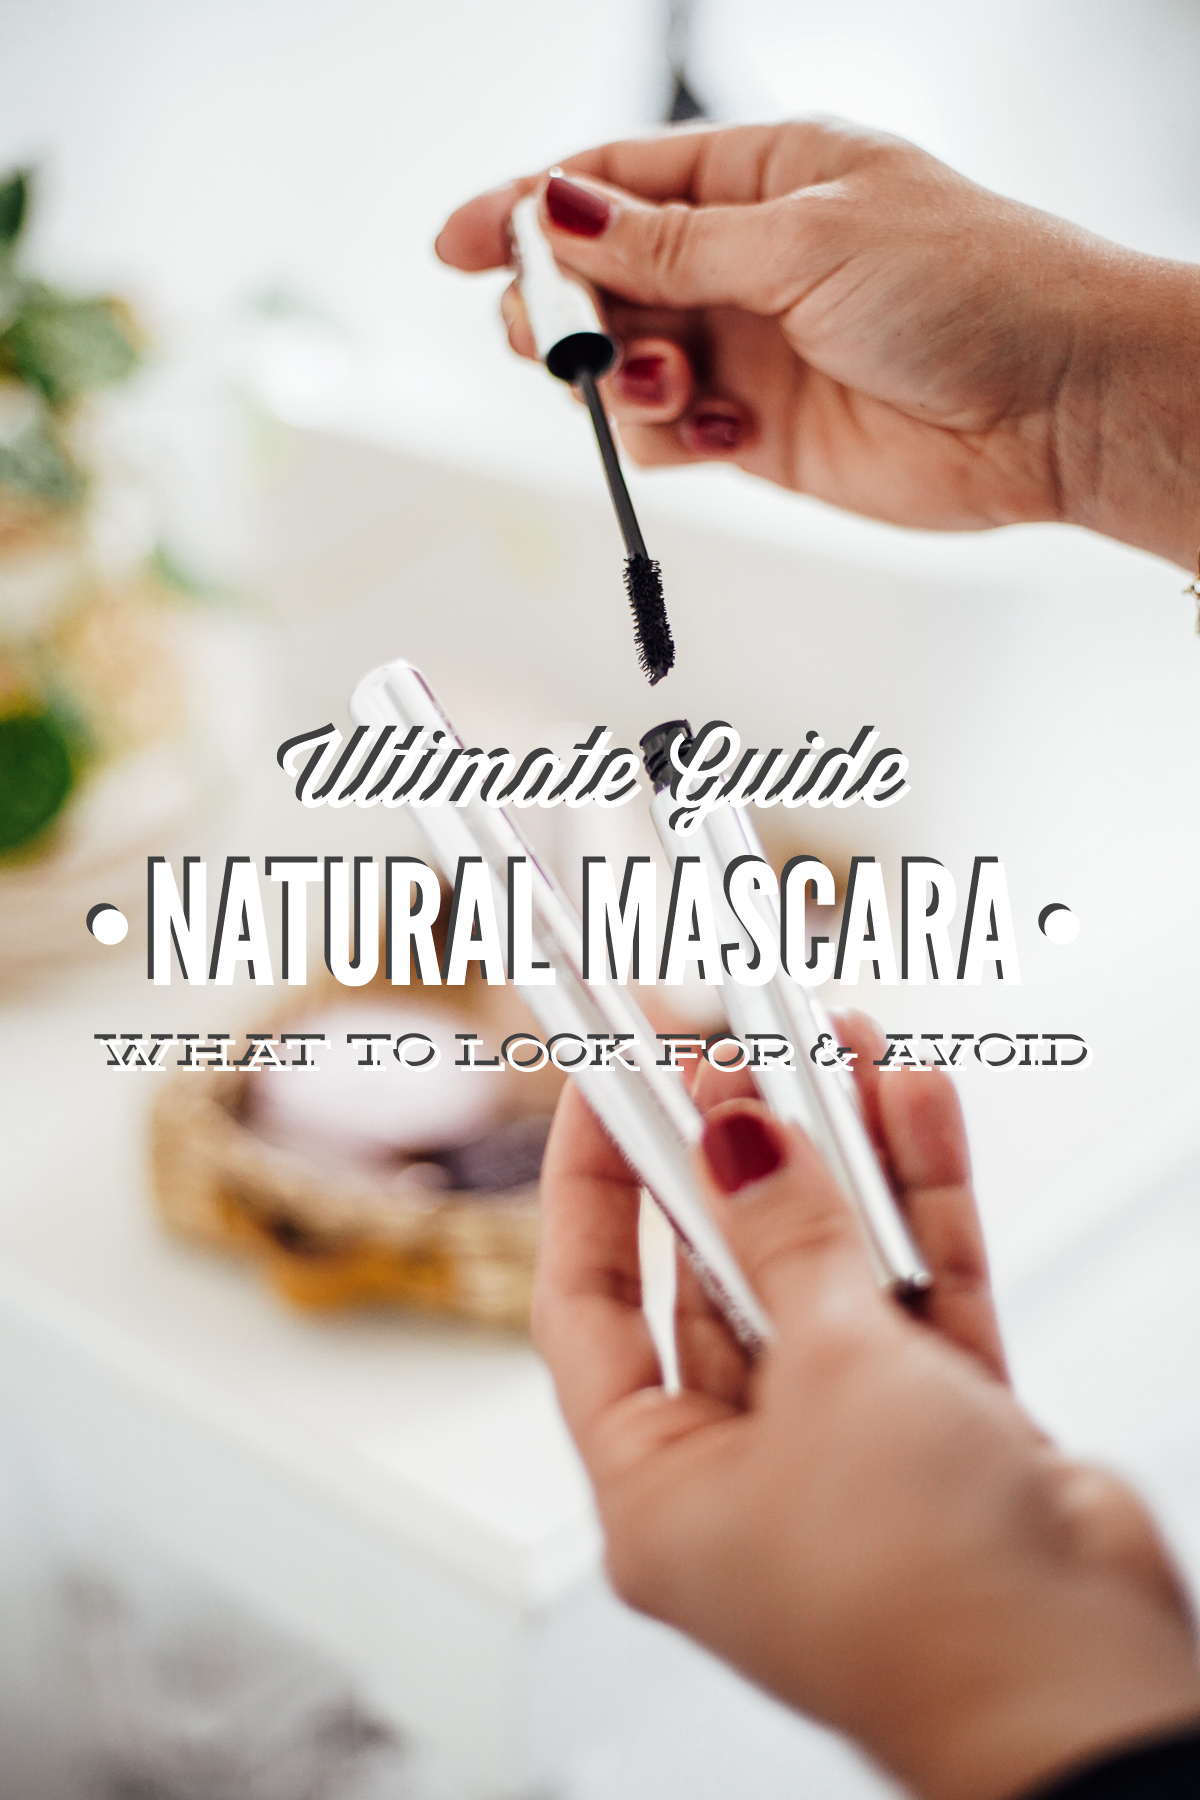 Ultimate Natural Mascara Guide: What to Look For & Avoid